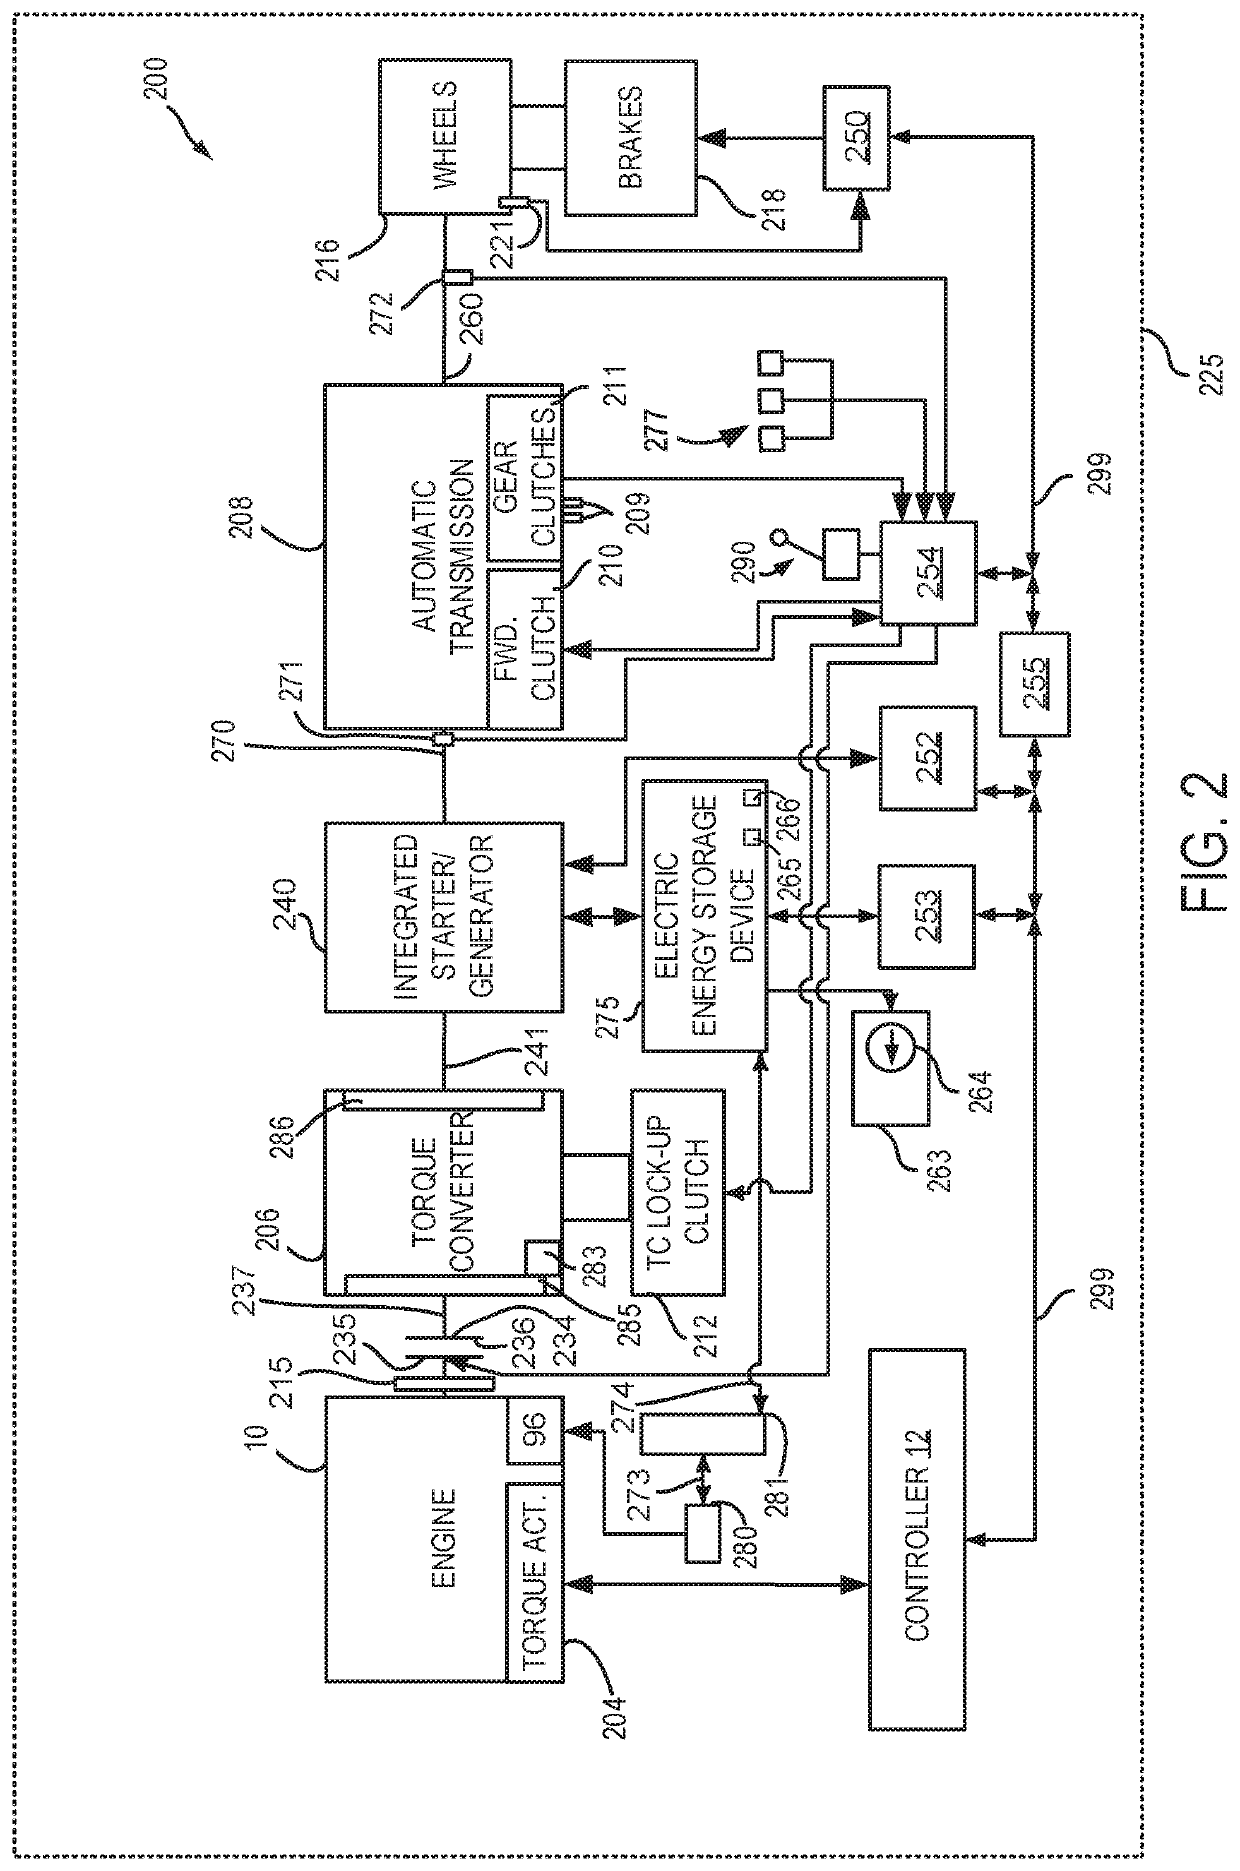 Methods and system for operating an engine in the presence of engine sensor degradation